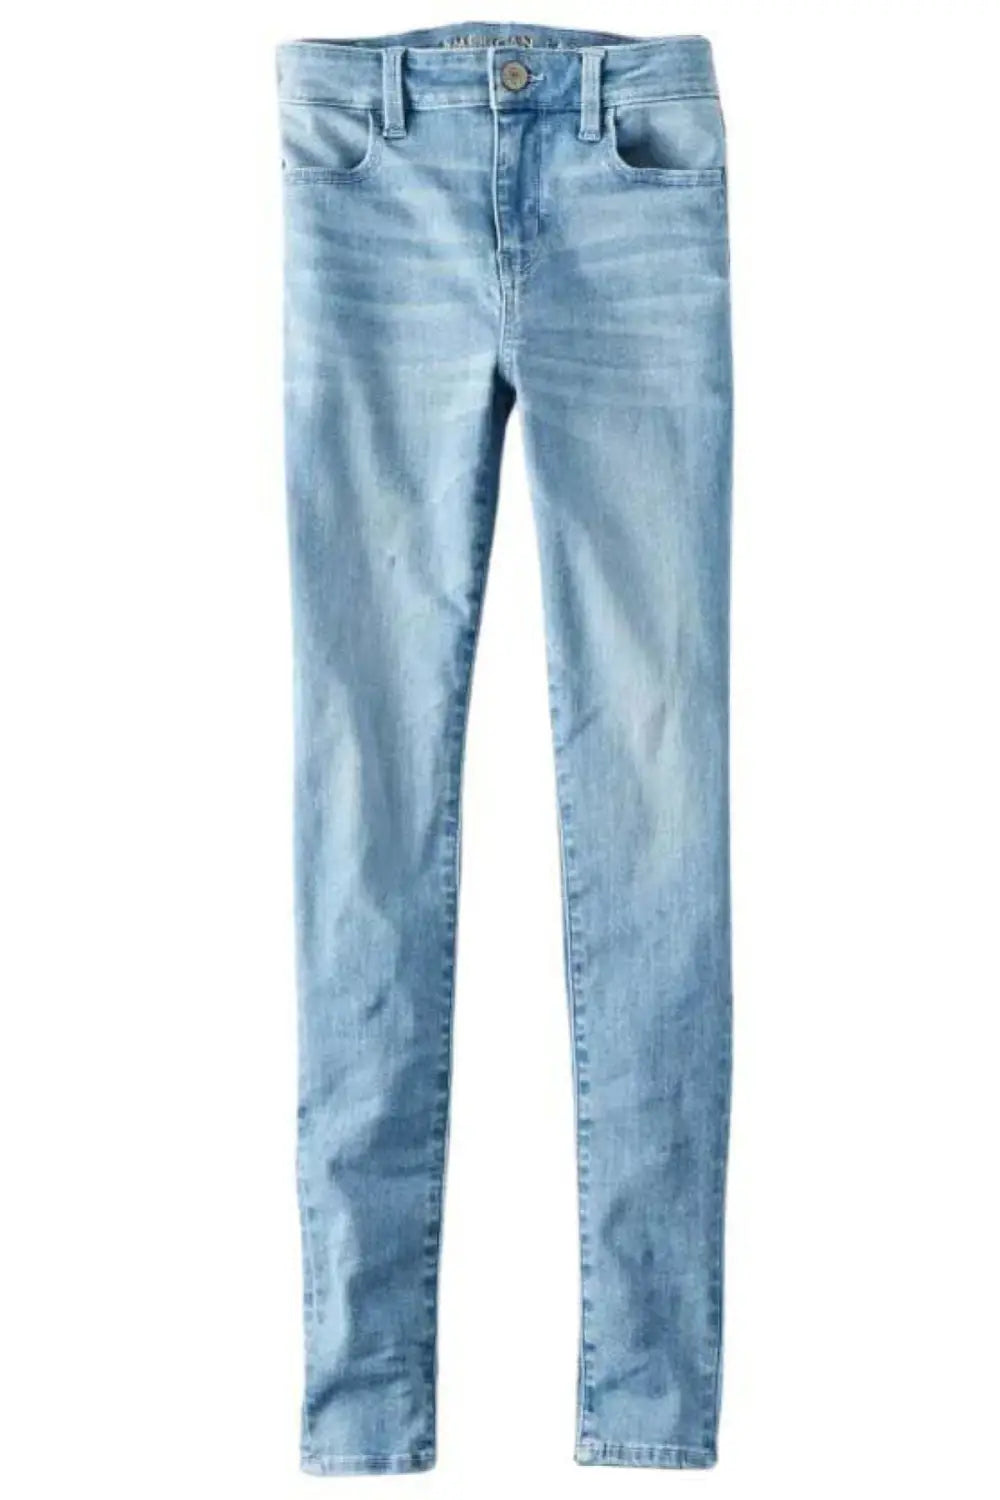 American Eagle Extra Stretch Skinny Jeans